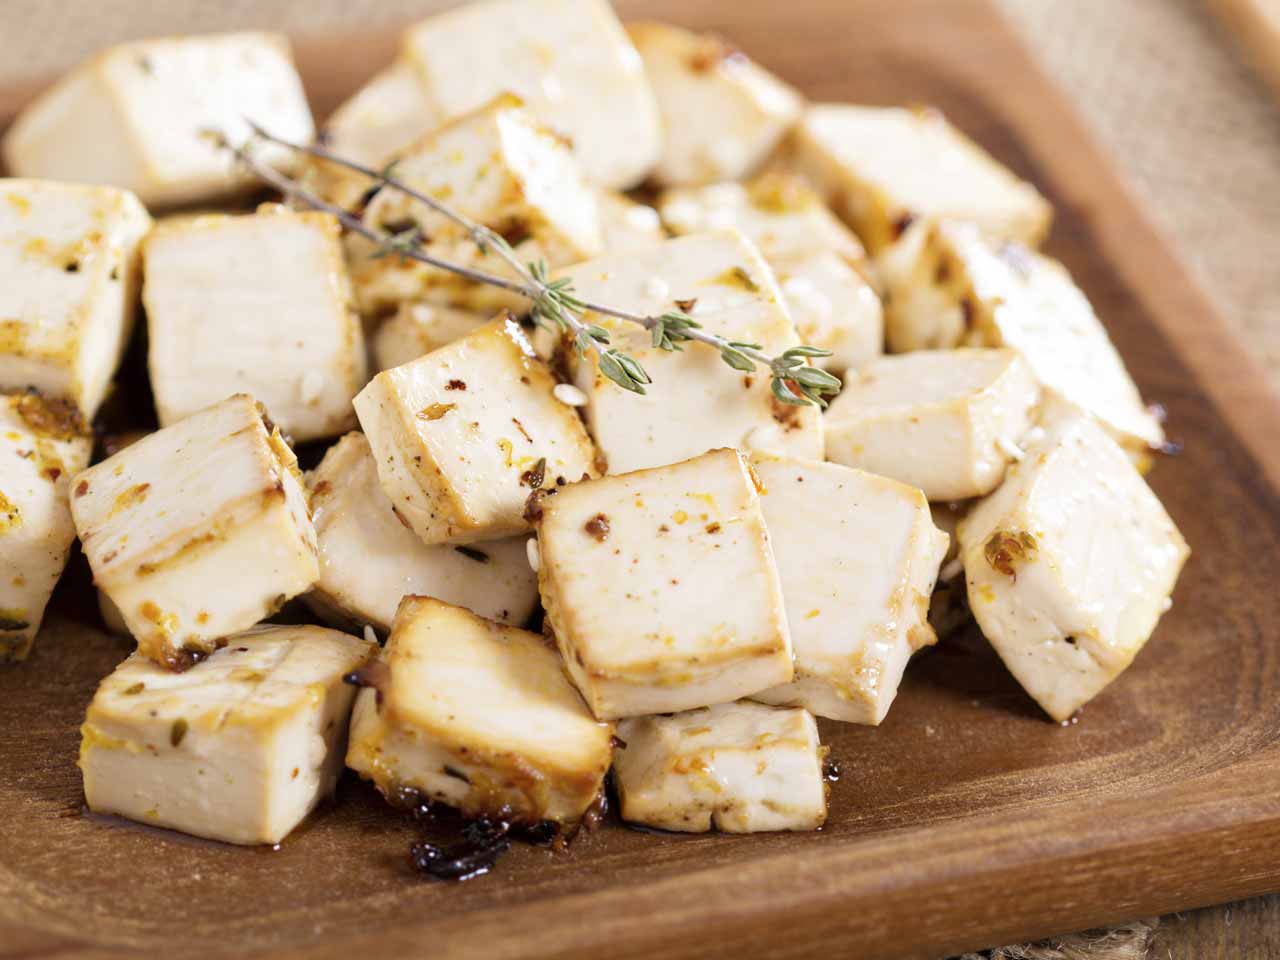 Add tofu to your diet